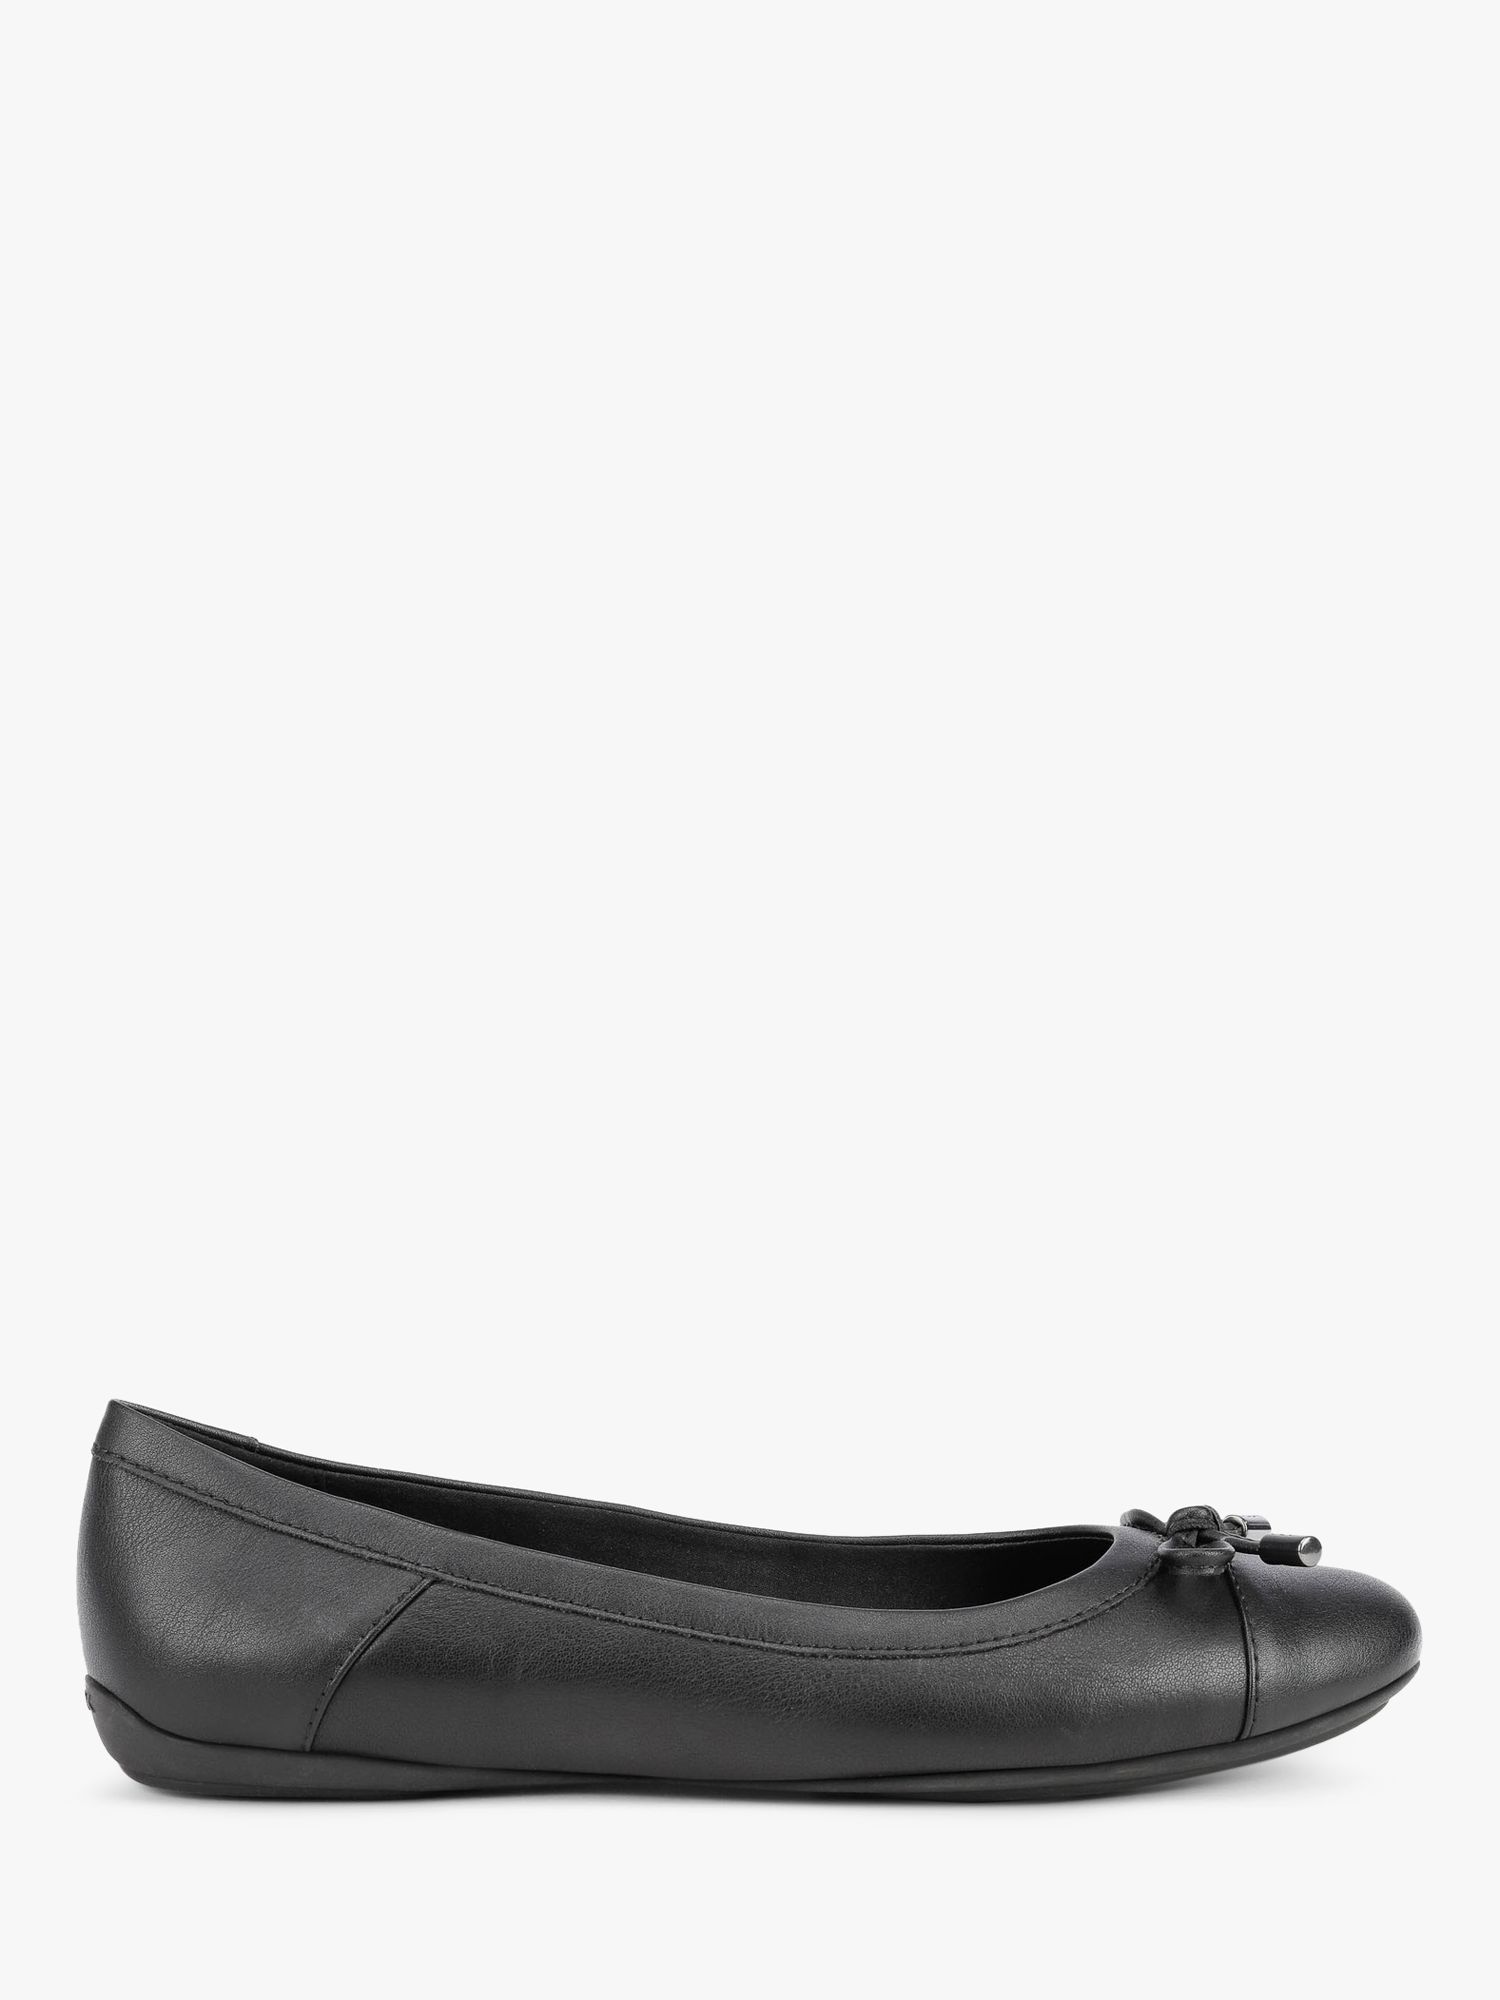 Geox Women's Charlene Wide Fit Leather Black at John Lewis & Partners